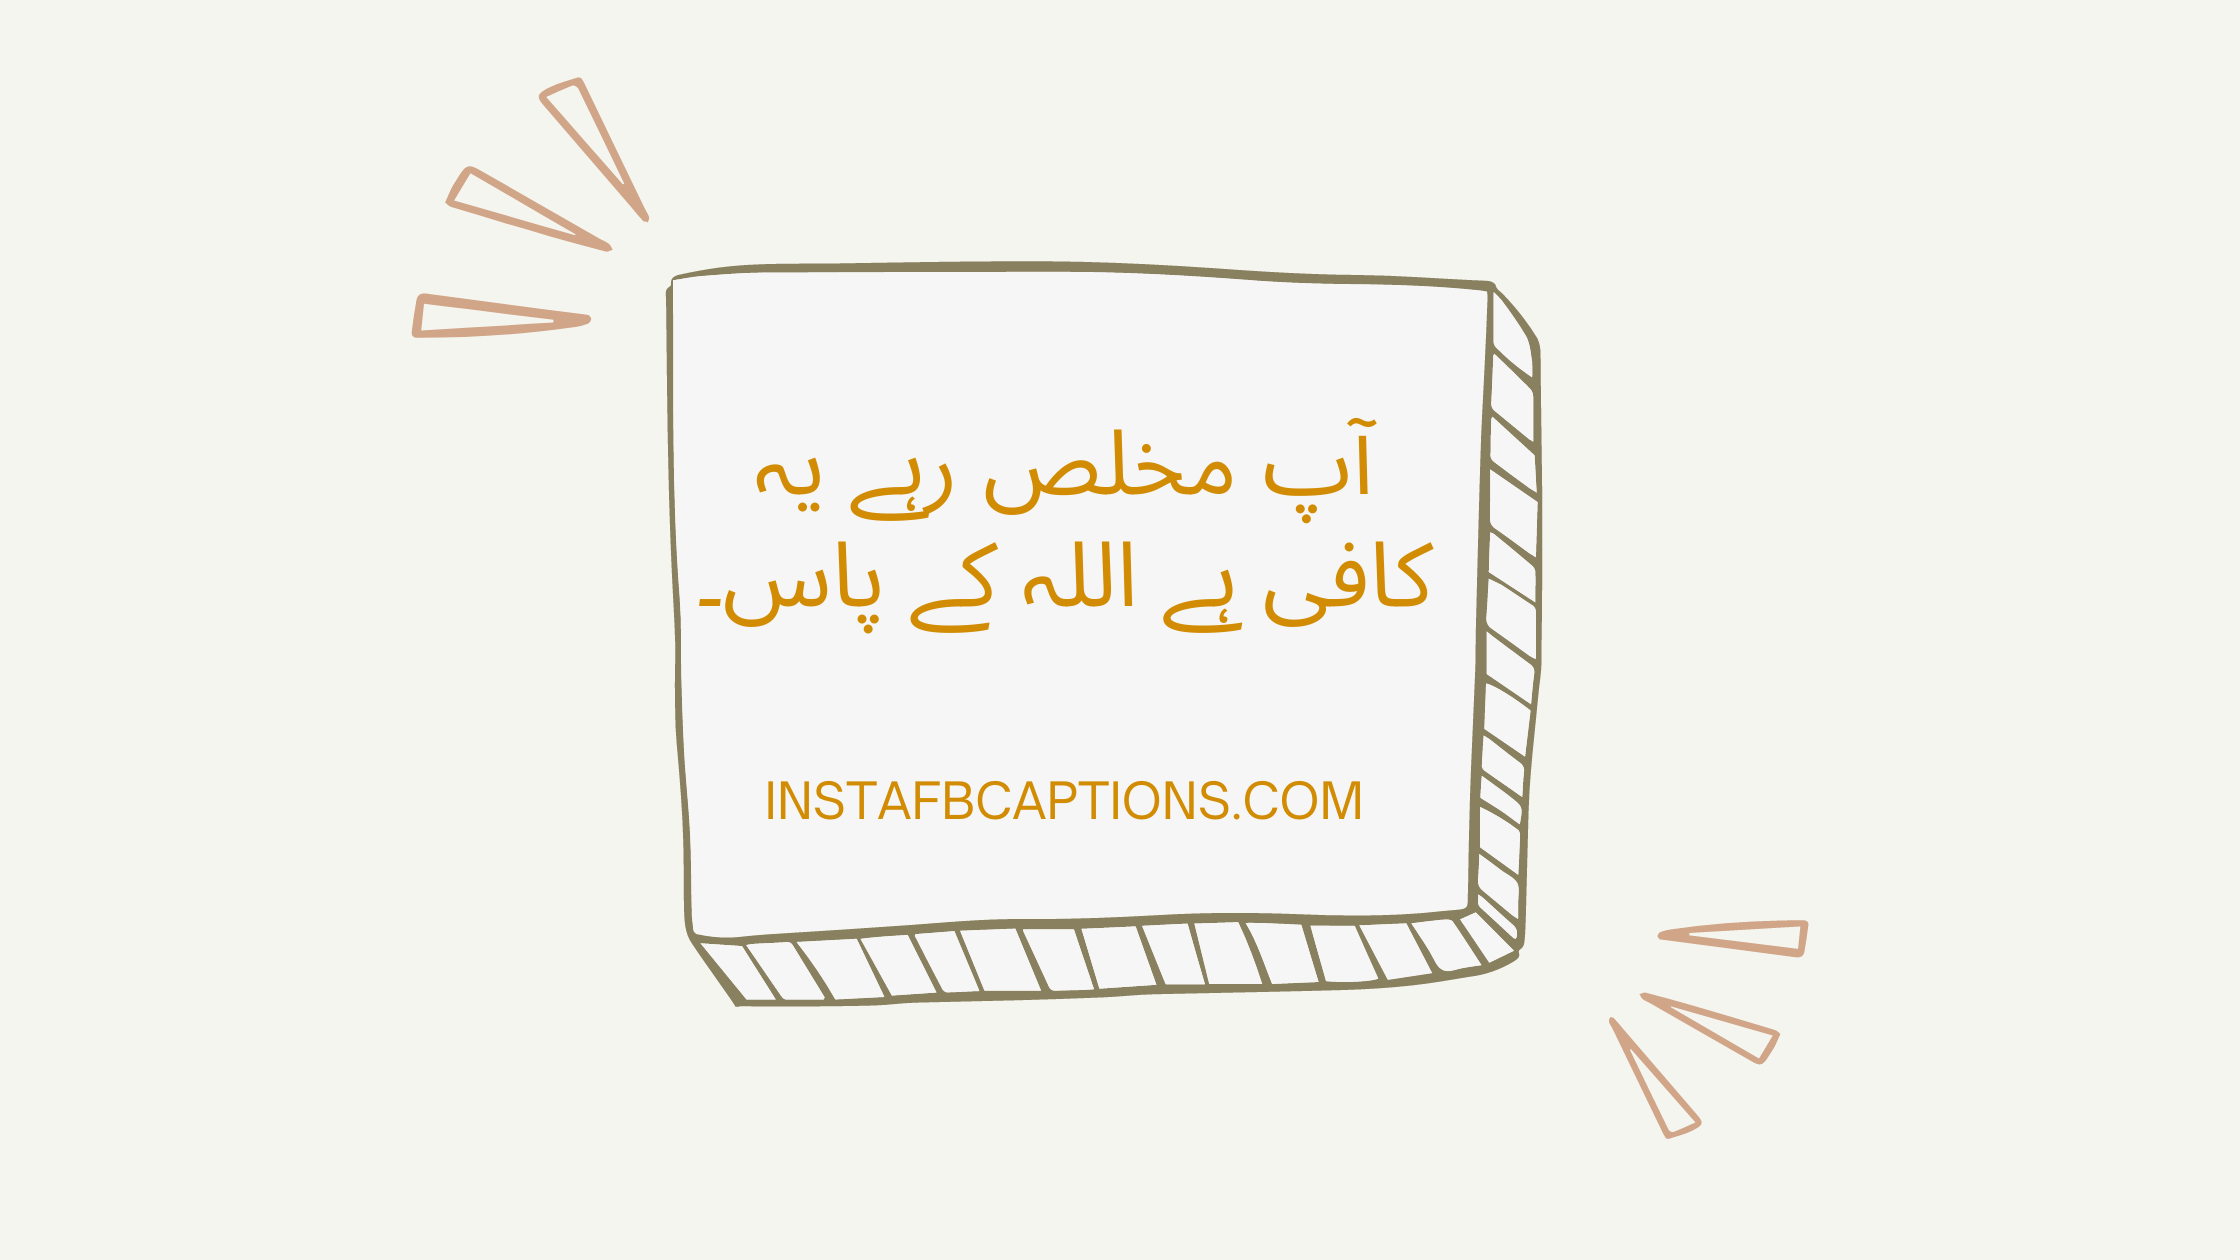 Lit Urdu Captions  - Lit Urdu Captions  - 107 Urdu Instagram Captions Quotes in 2022